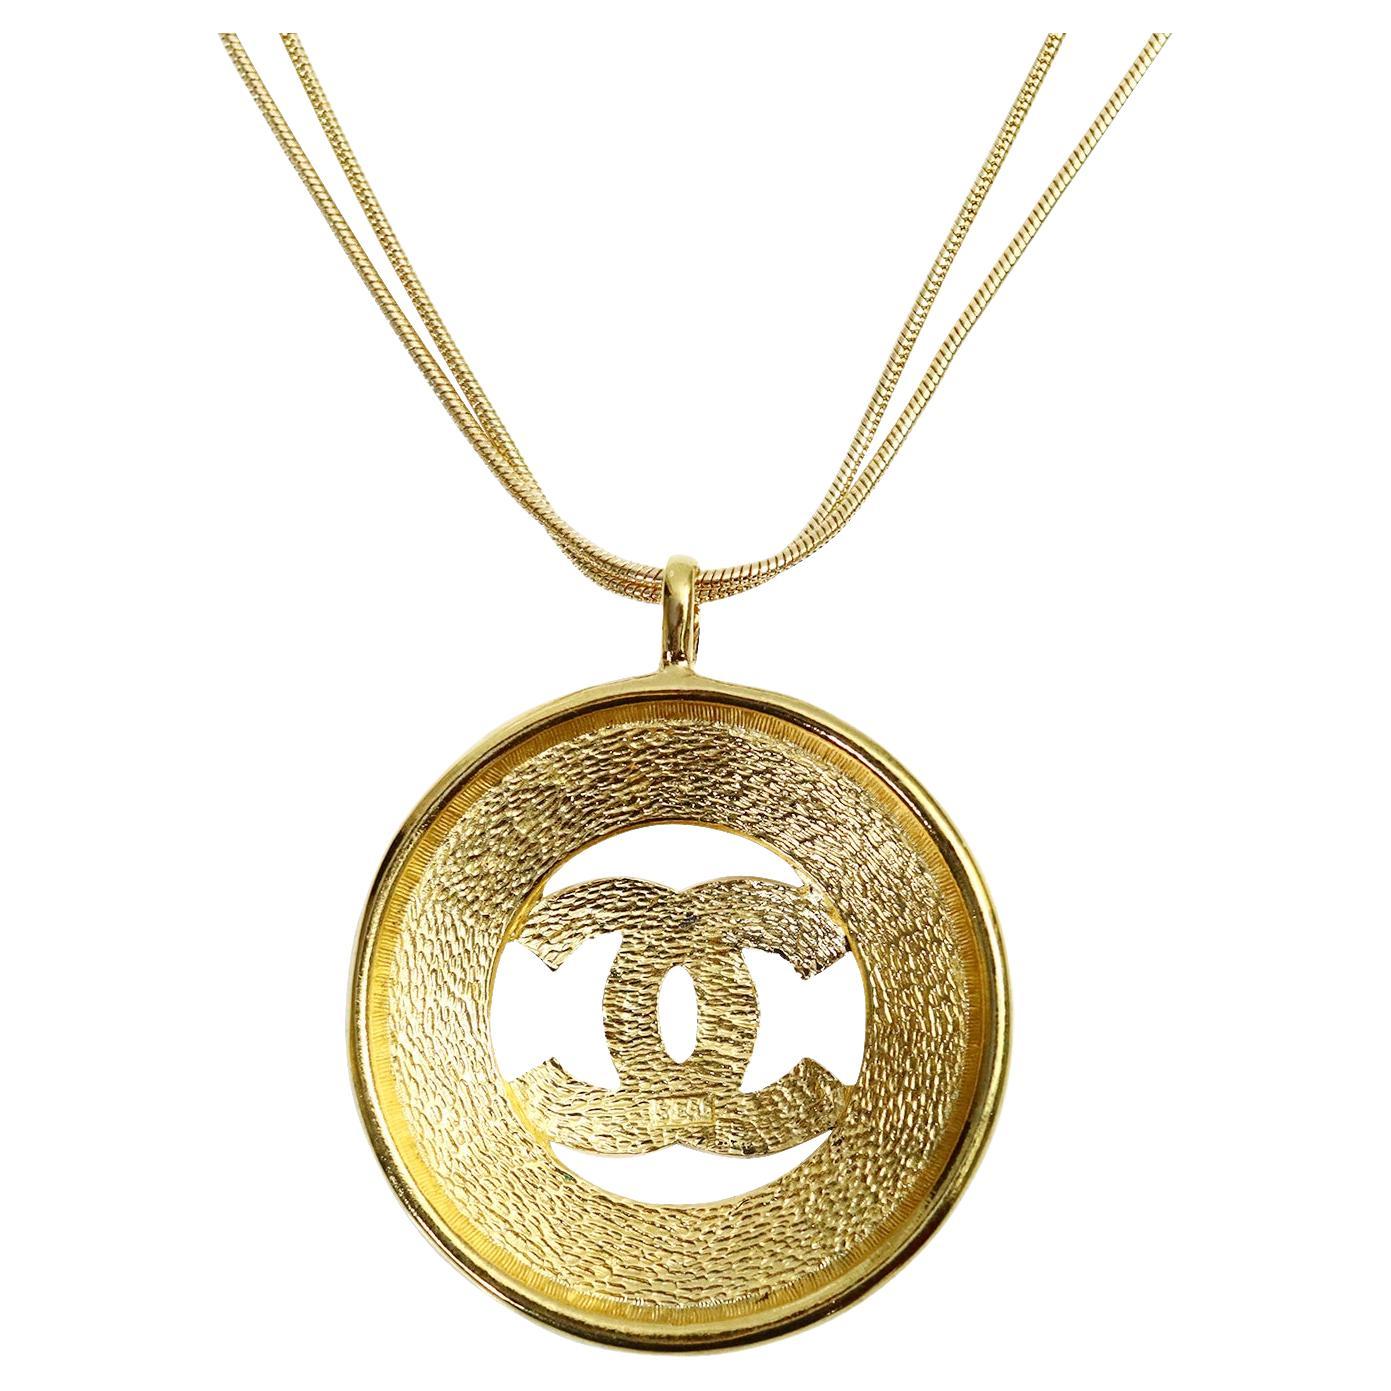 Artist Vintage Gold Tone Chanel Dangling Disc with Double CC Circa 1980s